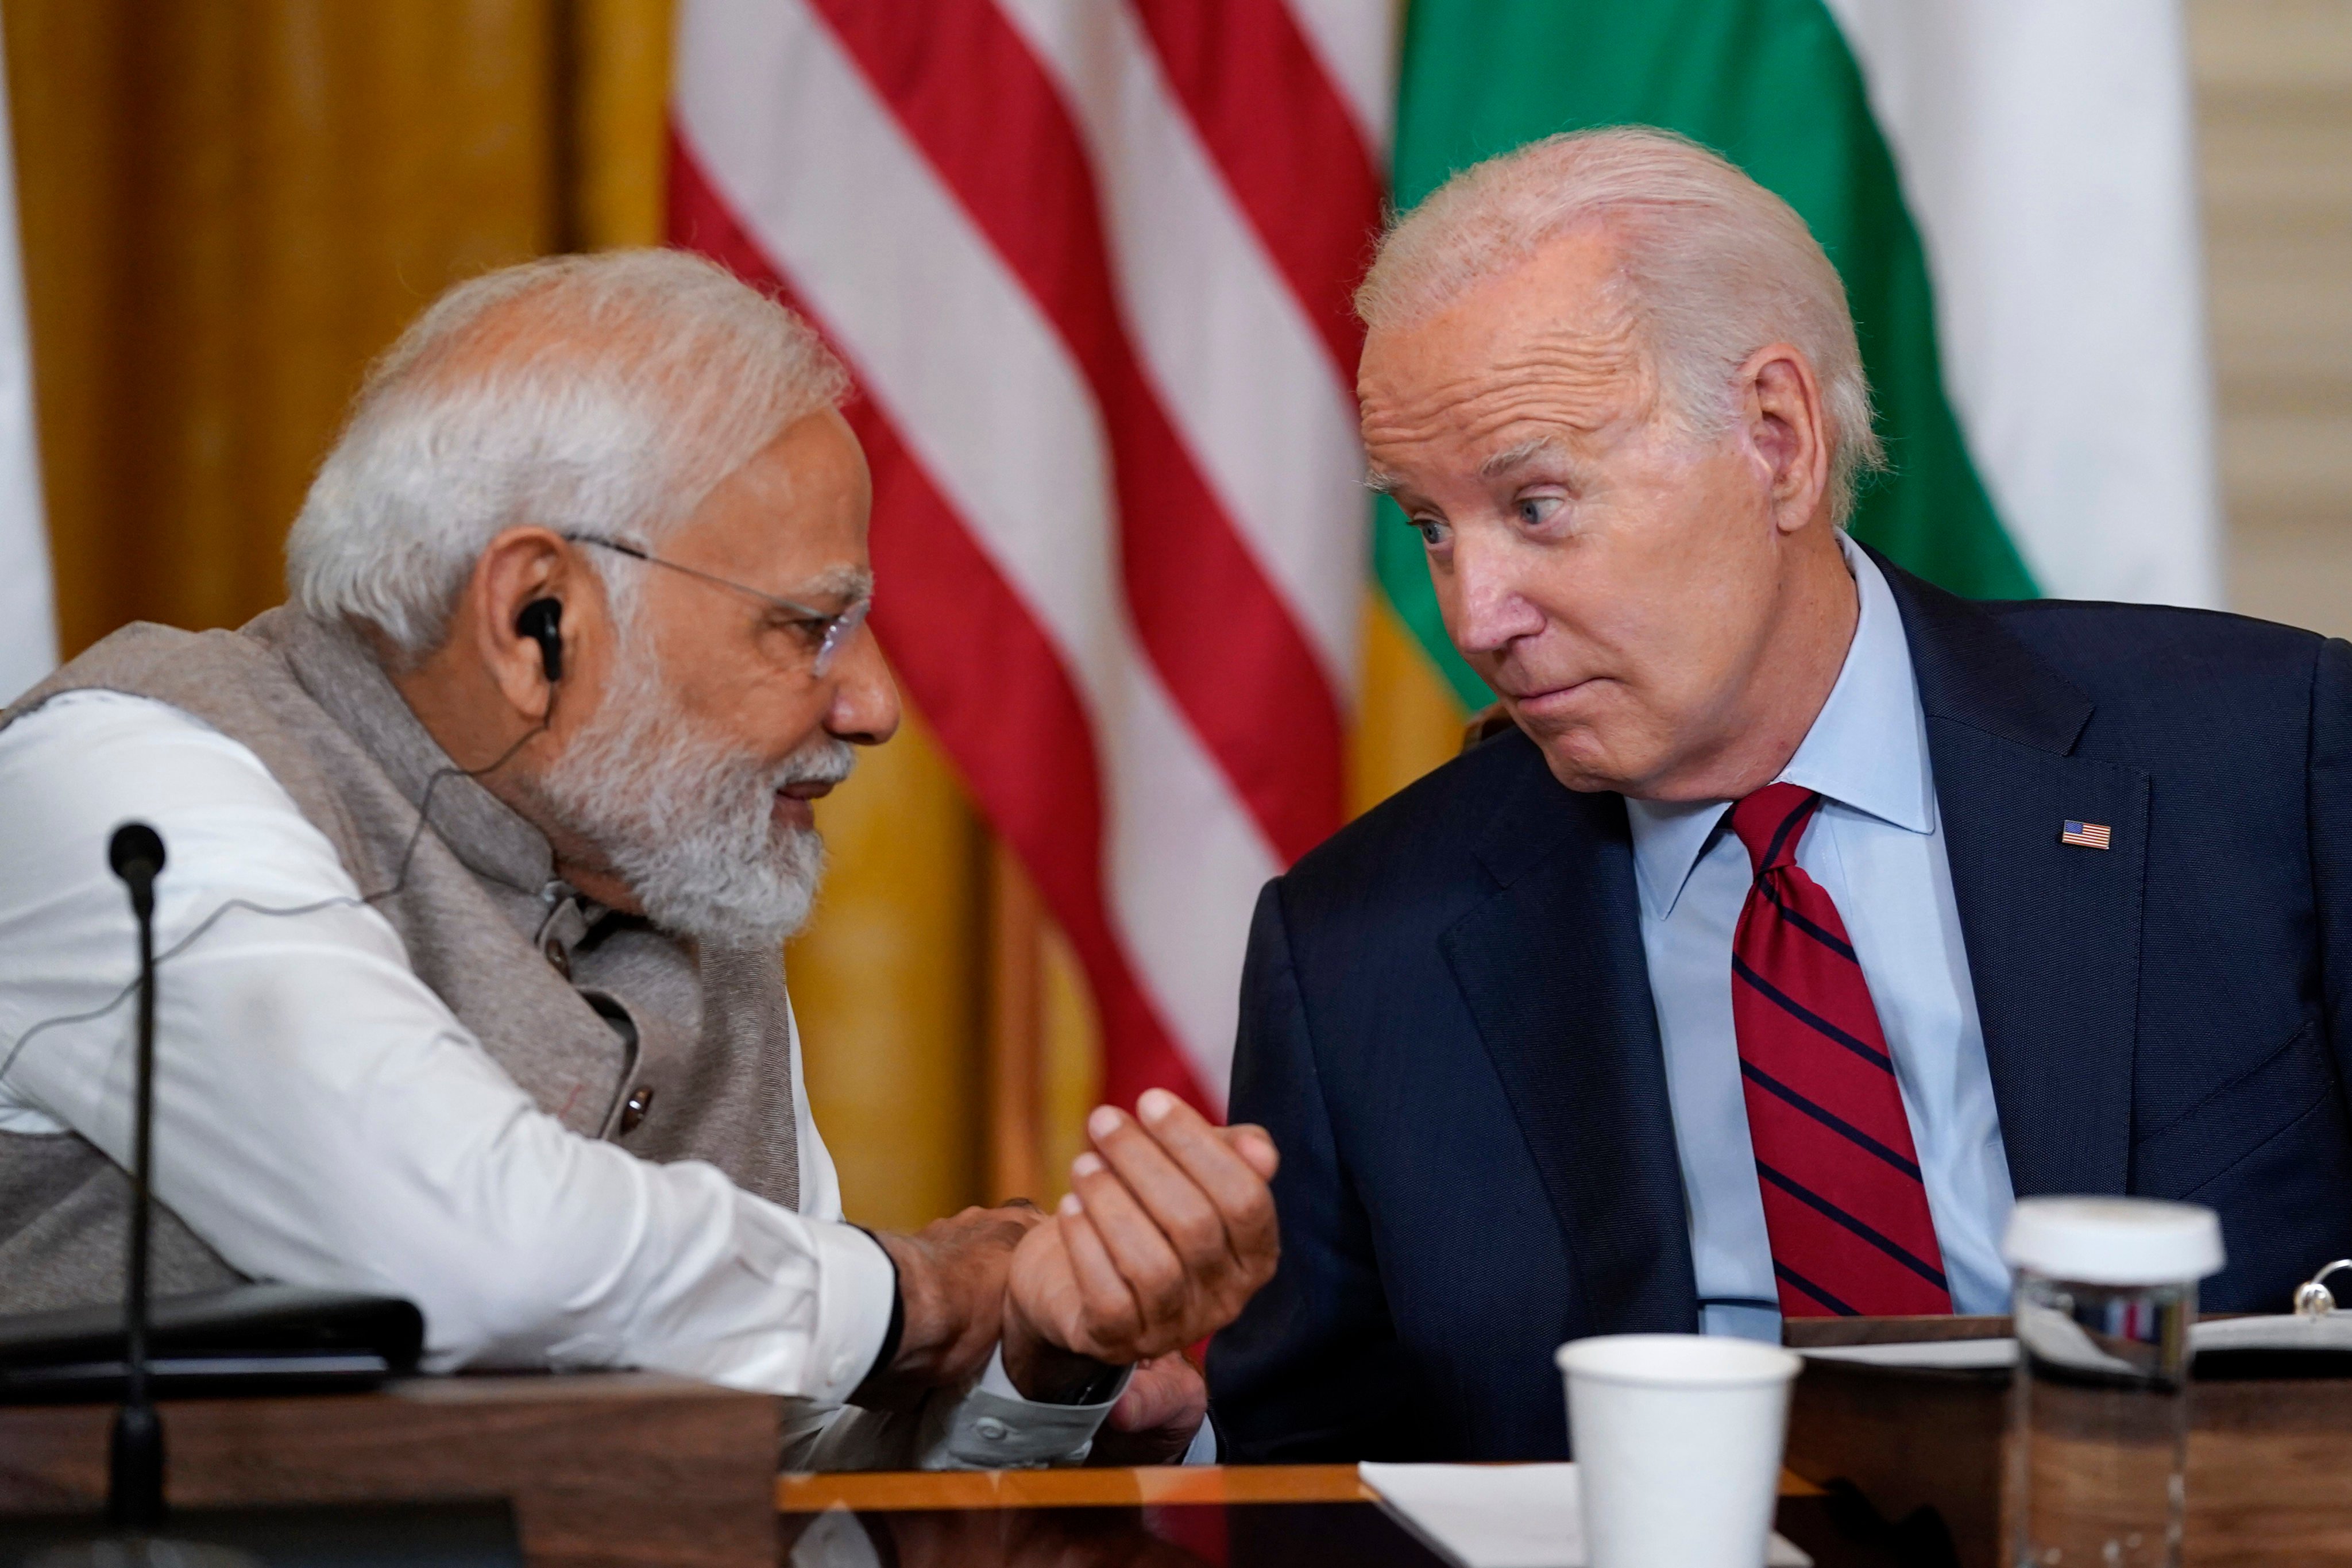 US President Joe Biden (right) speaks with India’s Prime Minister Narendra Modi during a meeting with American and Indian business leaders in the East Room of the White House in Washington on June 23. Modi’s US visit came as multinational corporations are increasingly looking to India as an option for diversifying away from China. Photo: AP